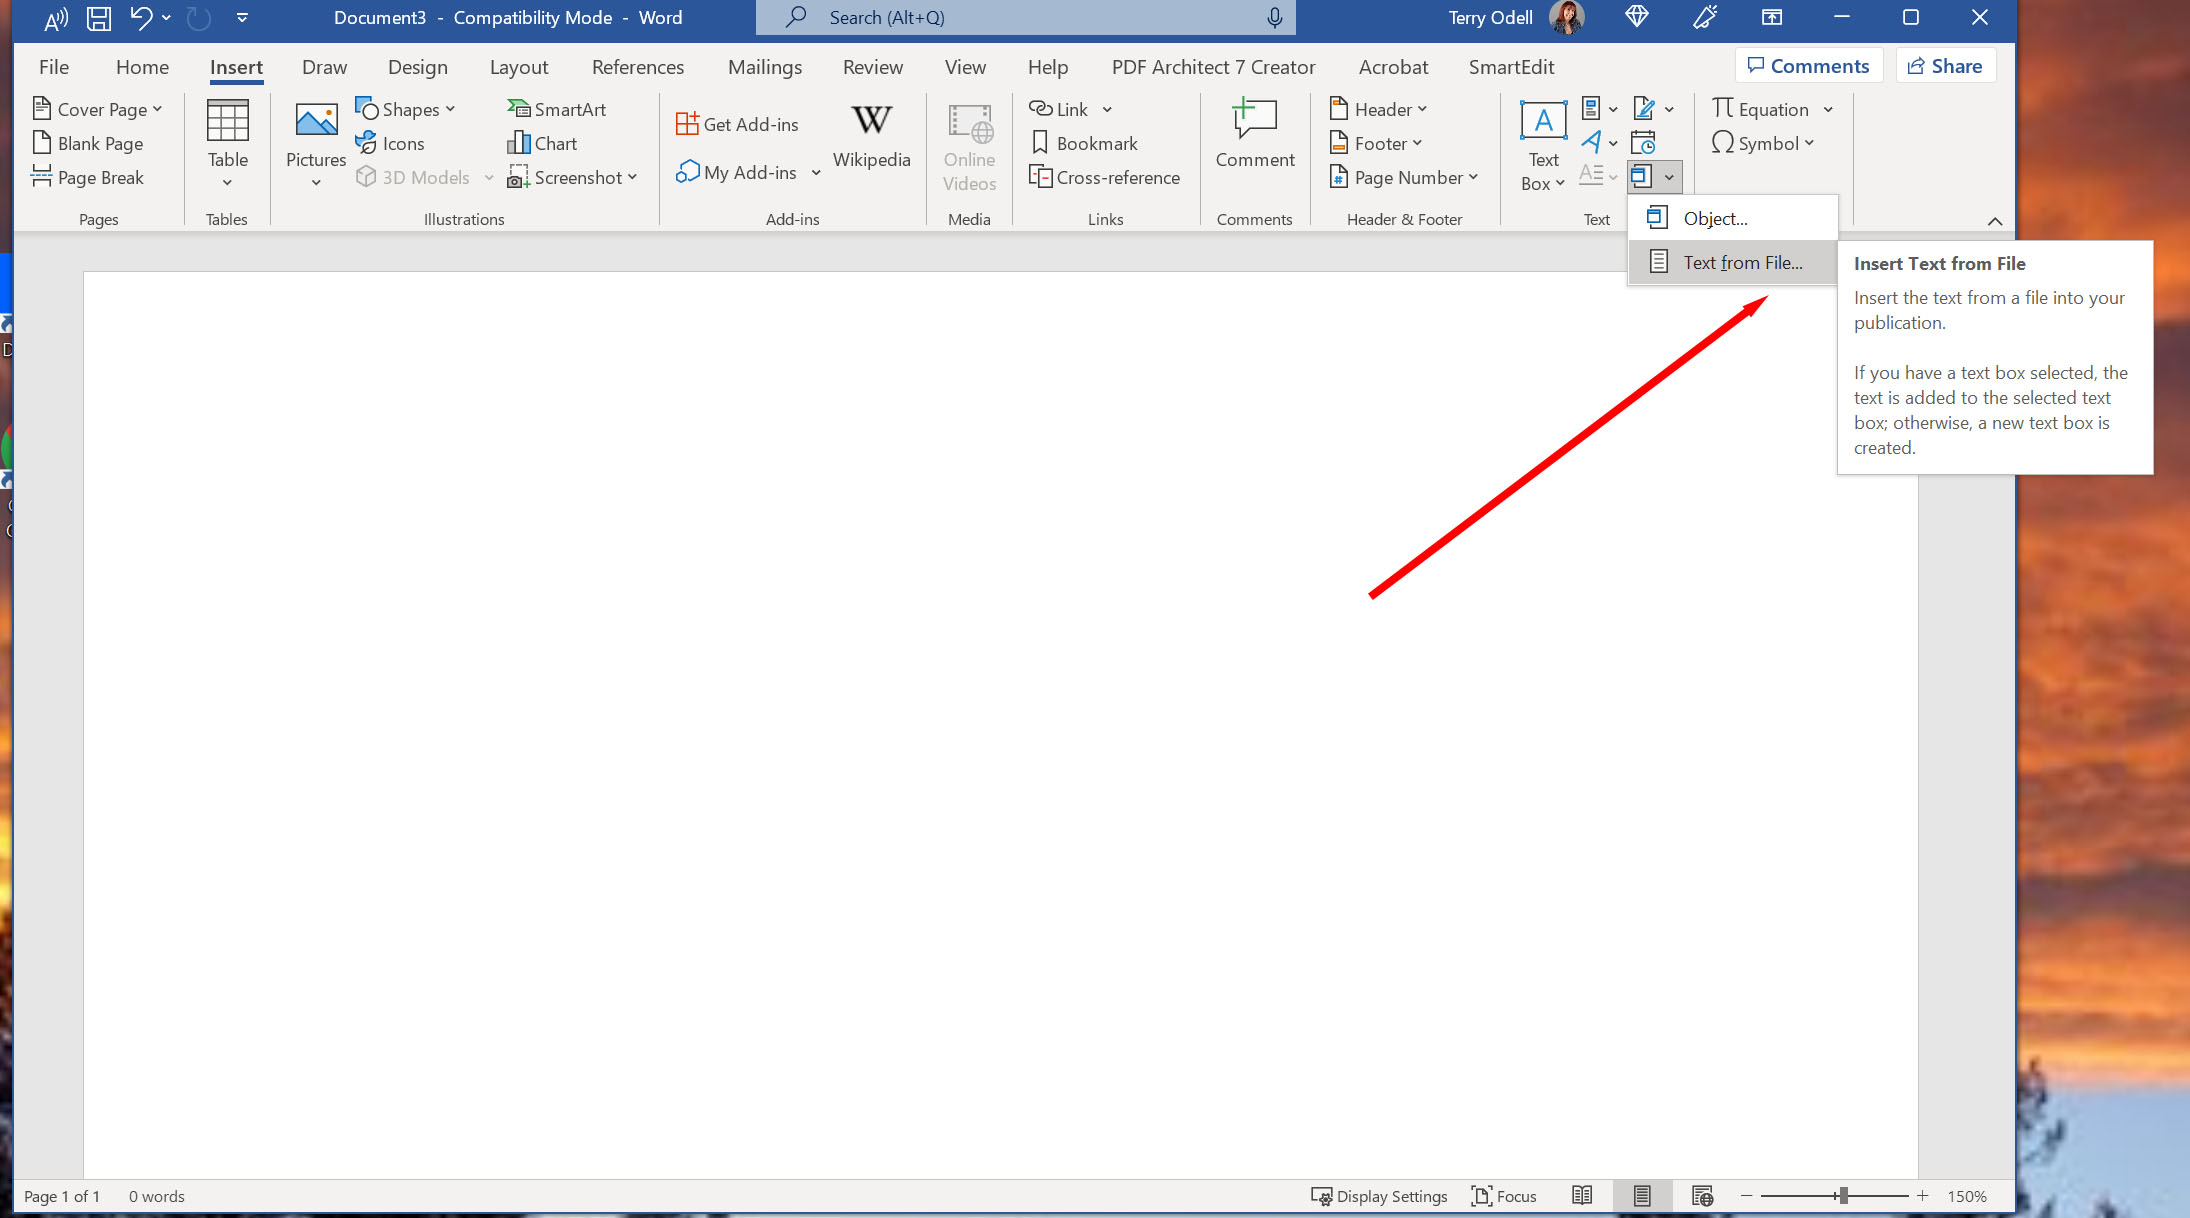 screenshot of Word showing an arrow to insert a file into a document